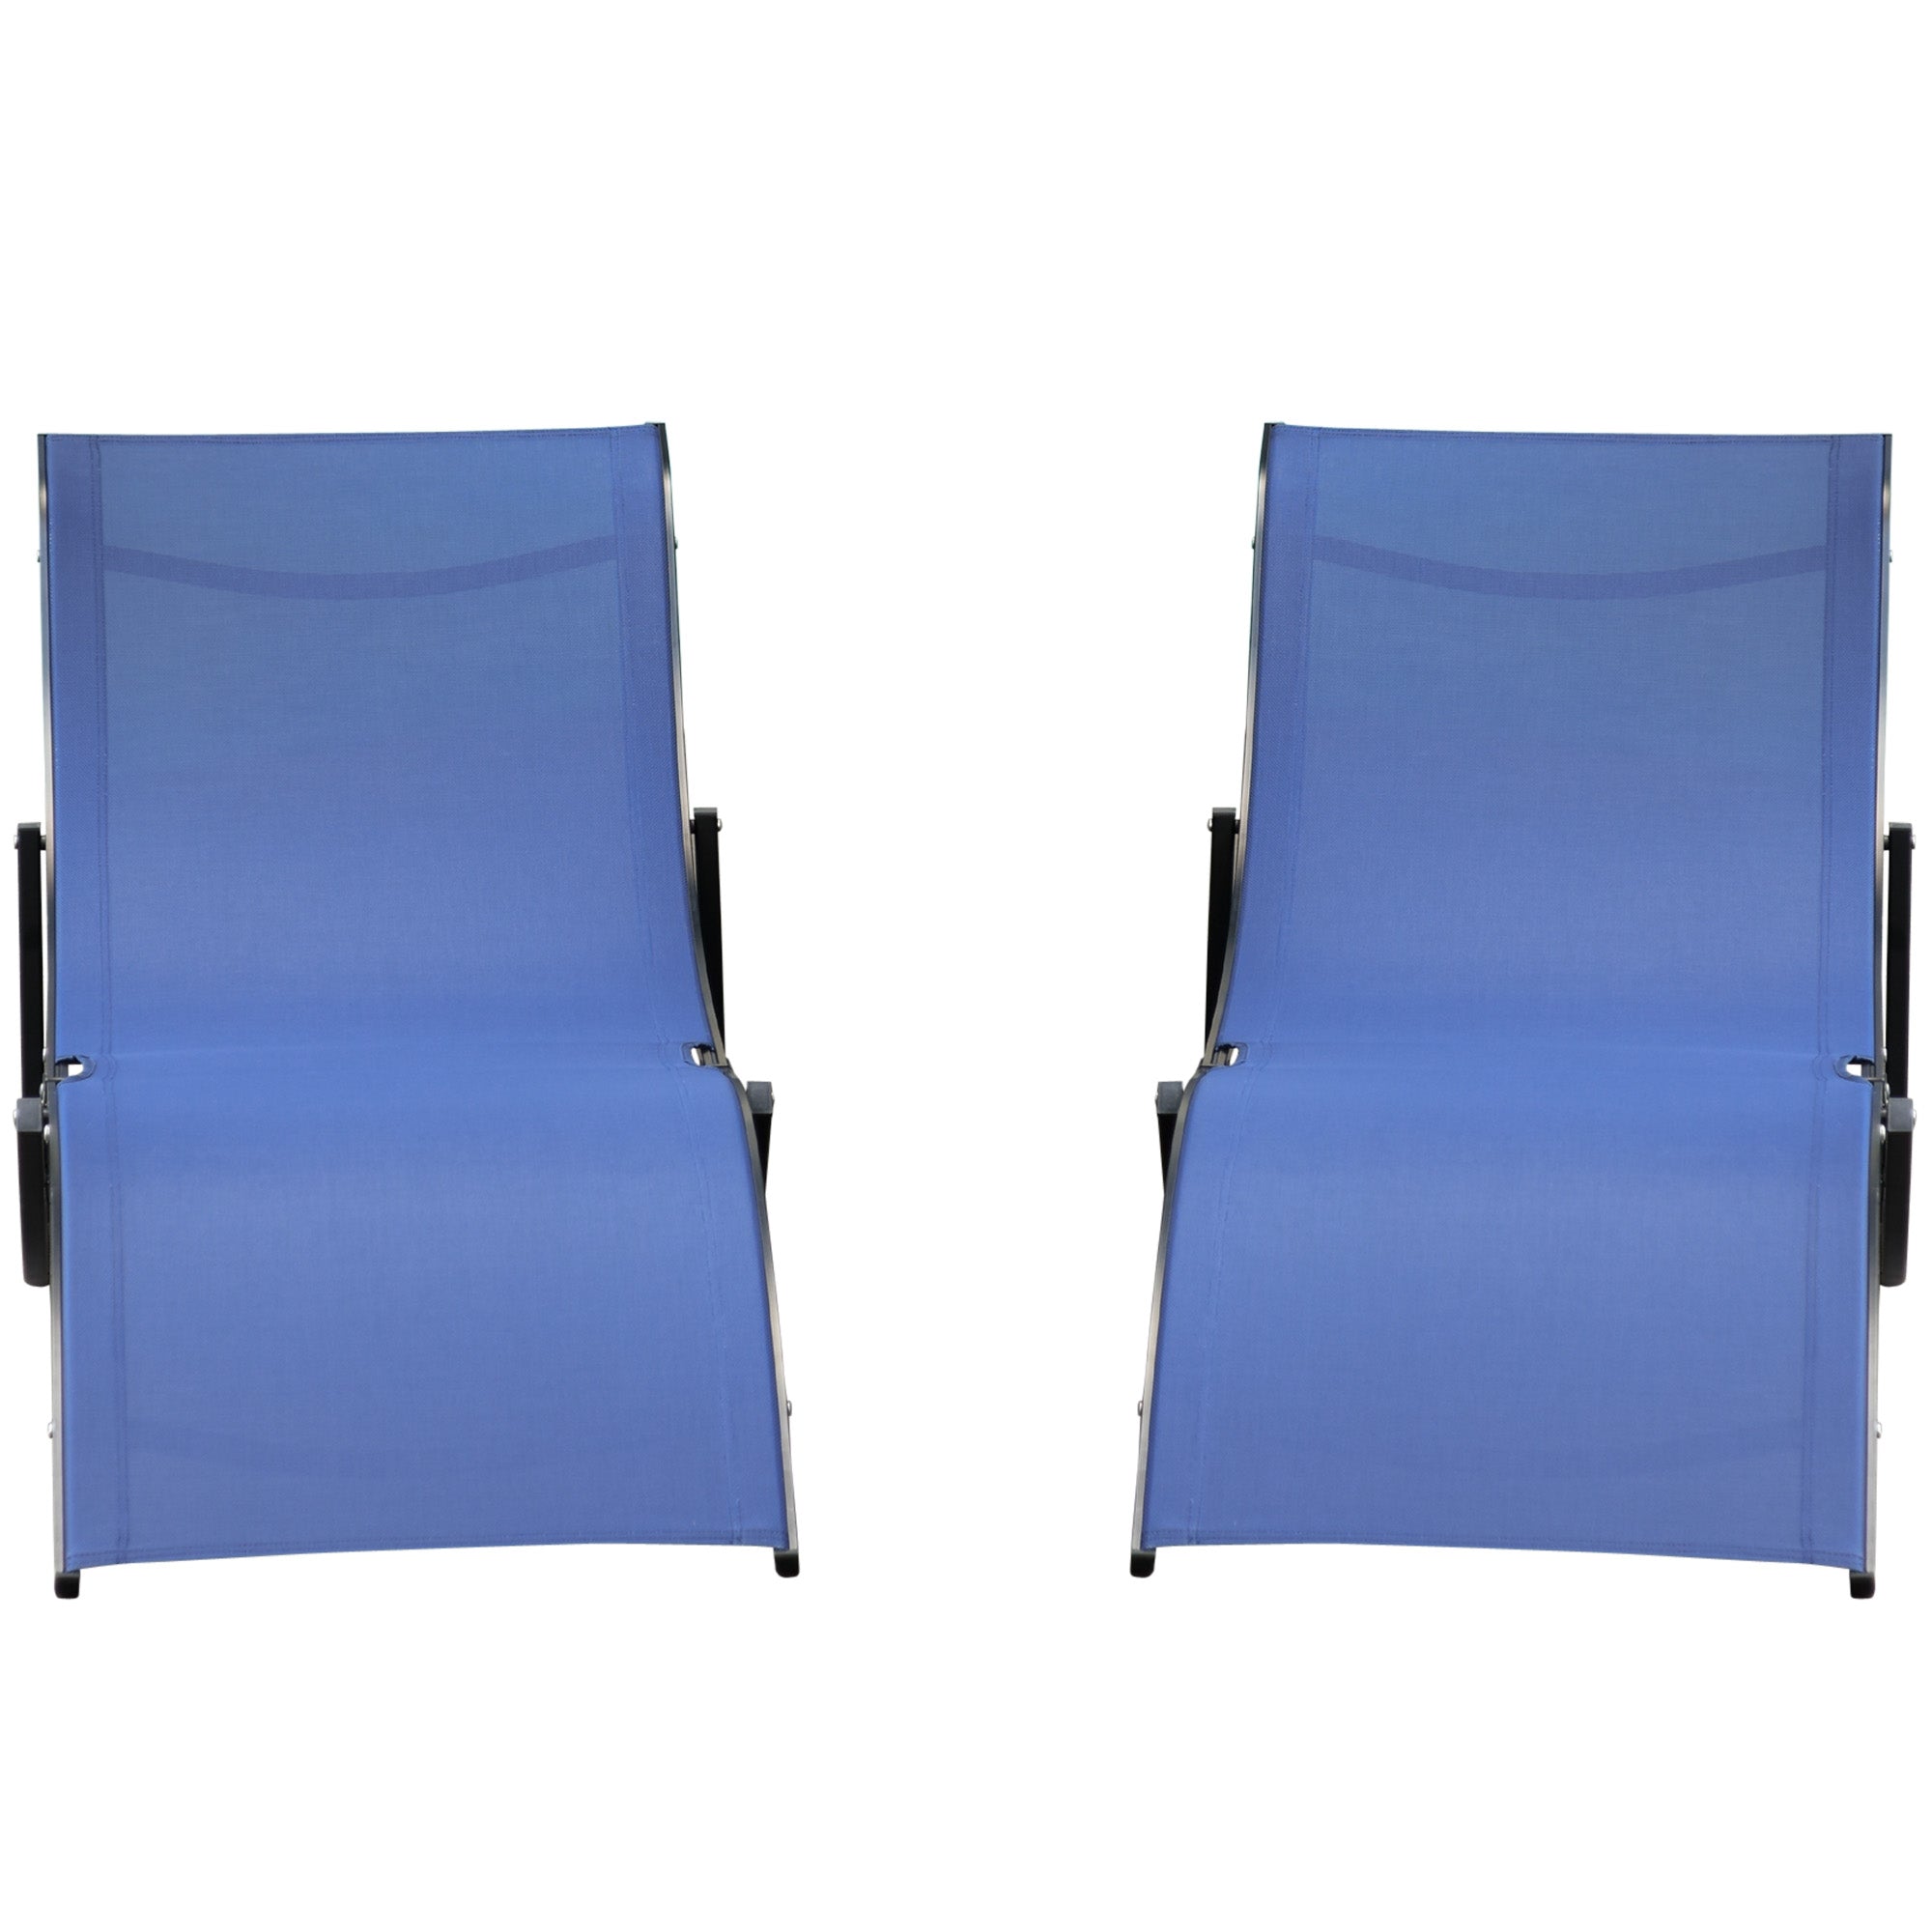 Outsunny Set of 2 S-shaped Foldable Lounge Chair Sun Lounger Reclining Outdoor Chair for Patio Beach Garden Blue - Inspirely